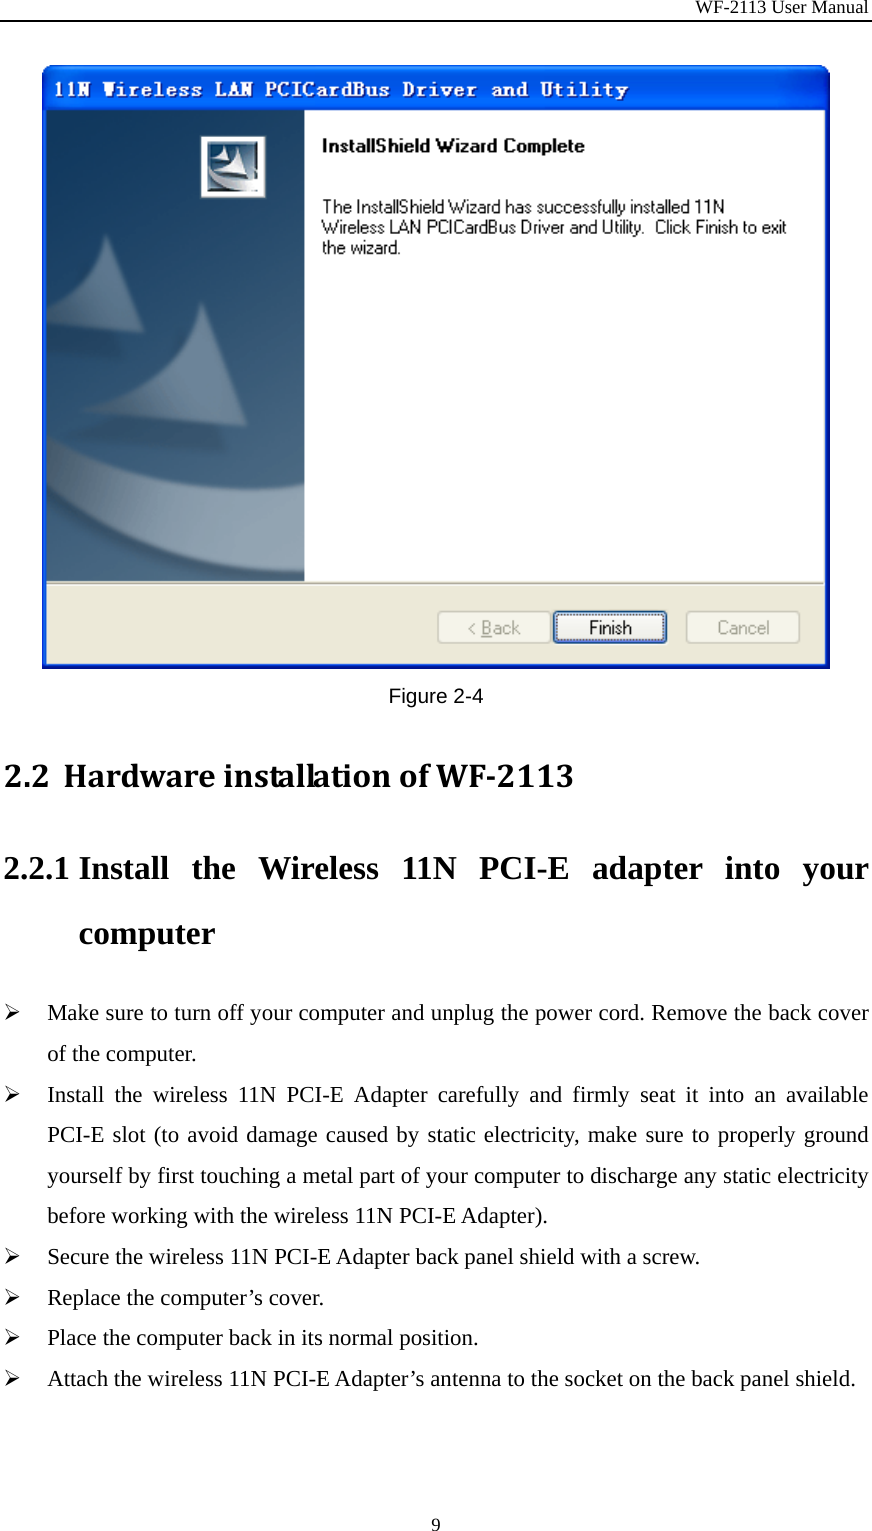 WF-2113 User Manual 9 Figure 2-4 2.2 HardwareinstallationofWF21132.2.1 Install the Wireless 11N PCI-E adapter into your computer ¾ Make sure to turn off your computer and unplug the power cord. Remove the back cover of the computer. ¾ Install the wireless 11N PCI-E Adapter carefully and firmly seat it into an available PCI-E slot (to avoid damage caused by static electricity, make sure to properly ground yourself by first touching a metal part of your computer to discharge any static electricity before working with the wireless 11N PCI-E Adapter). ¾ Secure the wireless 11N PCI-E Adapter back panel shield with a screw. ¾ Replace the computer’s cover. ¾ Place the computer back in its normal position. ¾ Attach the wireless 11N PCI-E Adapter’s antenna to the socket on the back panel shield. 